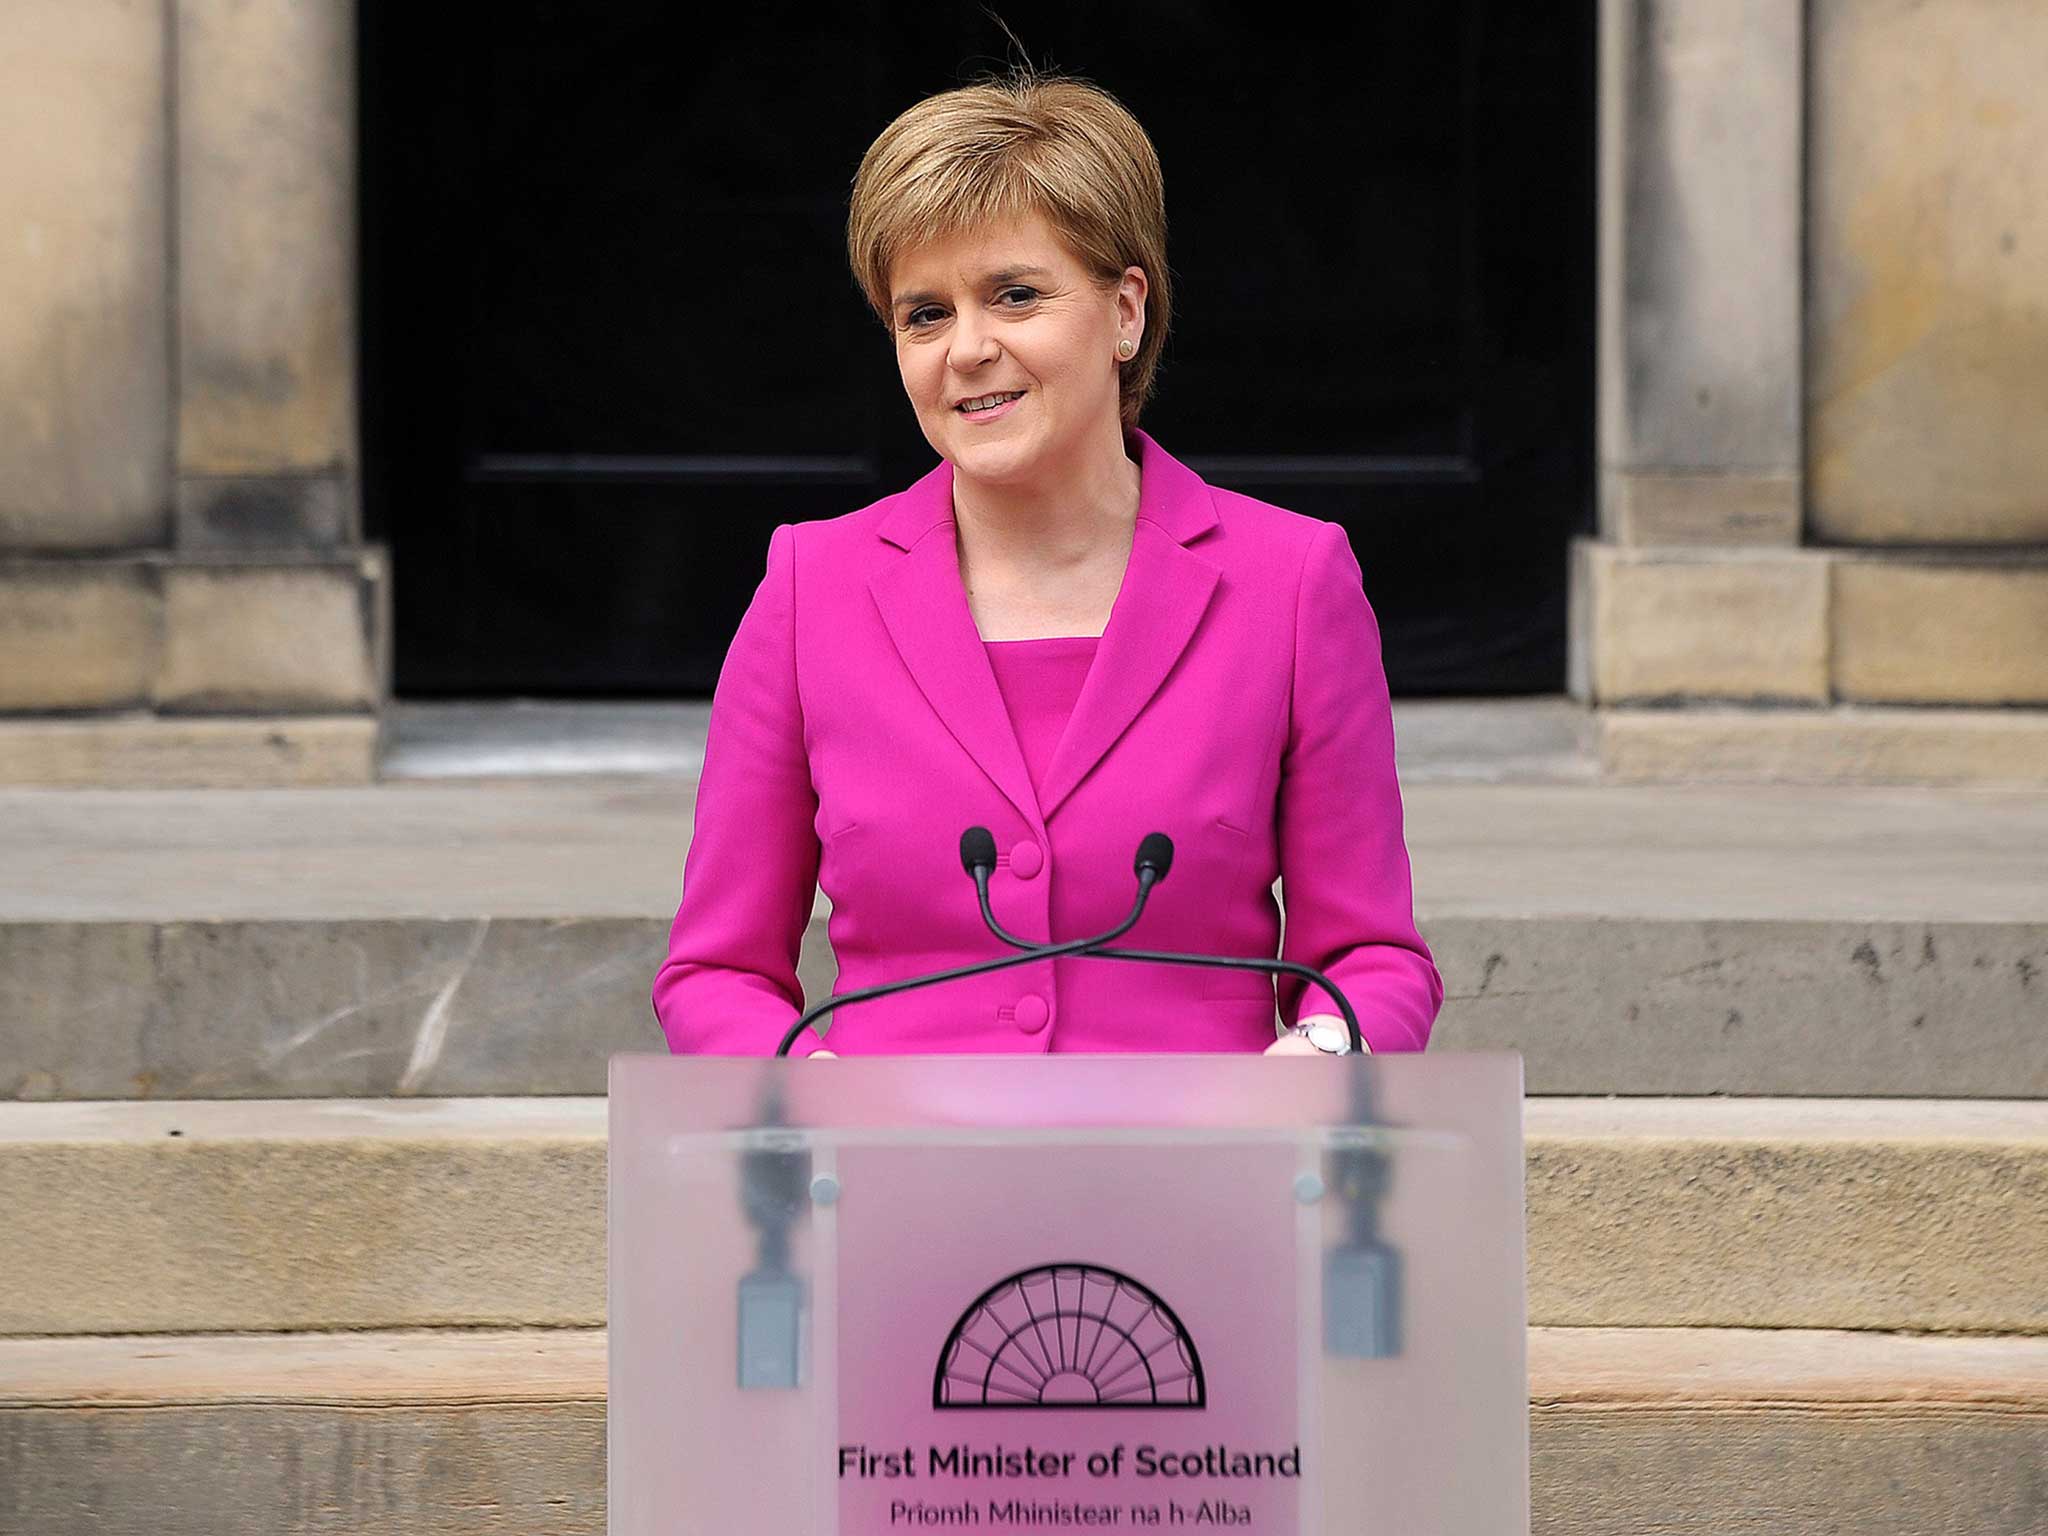 Scotland's First Minister and SNP leader Nicola Sturgeon addresses the media outside Bute House, the official residence of the Scottish First Minister, in Edinburgh. Scottish nationalists won a third term in power but lost their outright majority in one of a series of local and regional elections seen as a key test for Labour leader Jeremy Corbyn